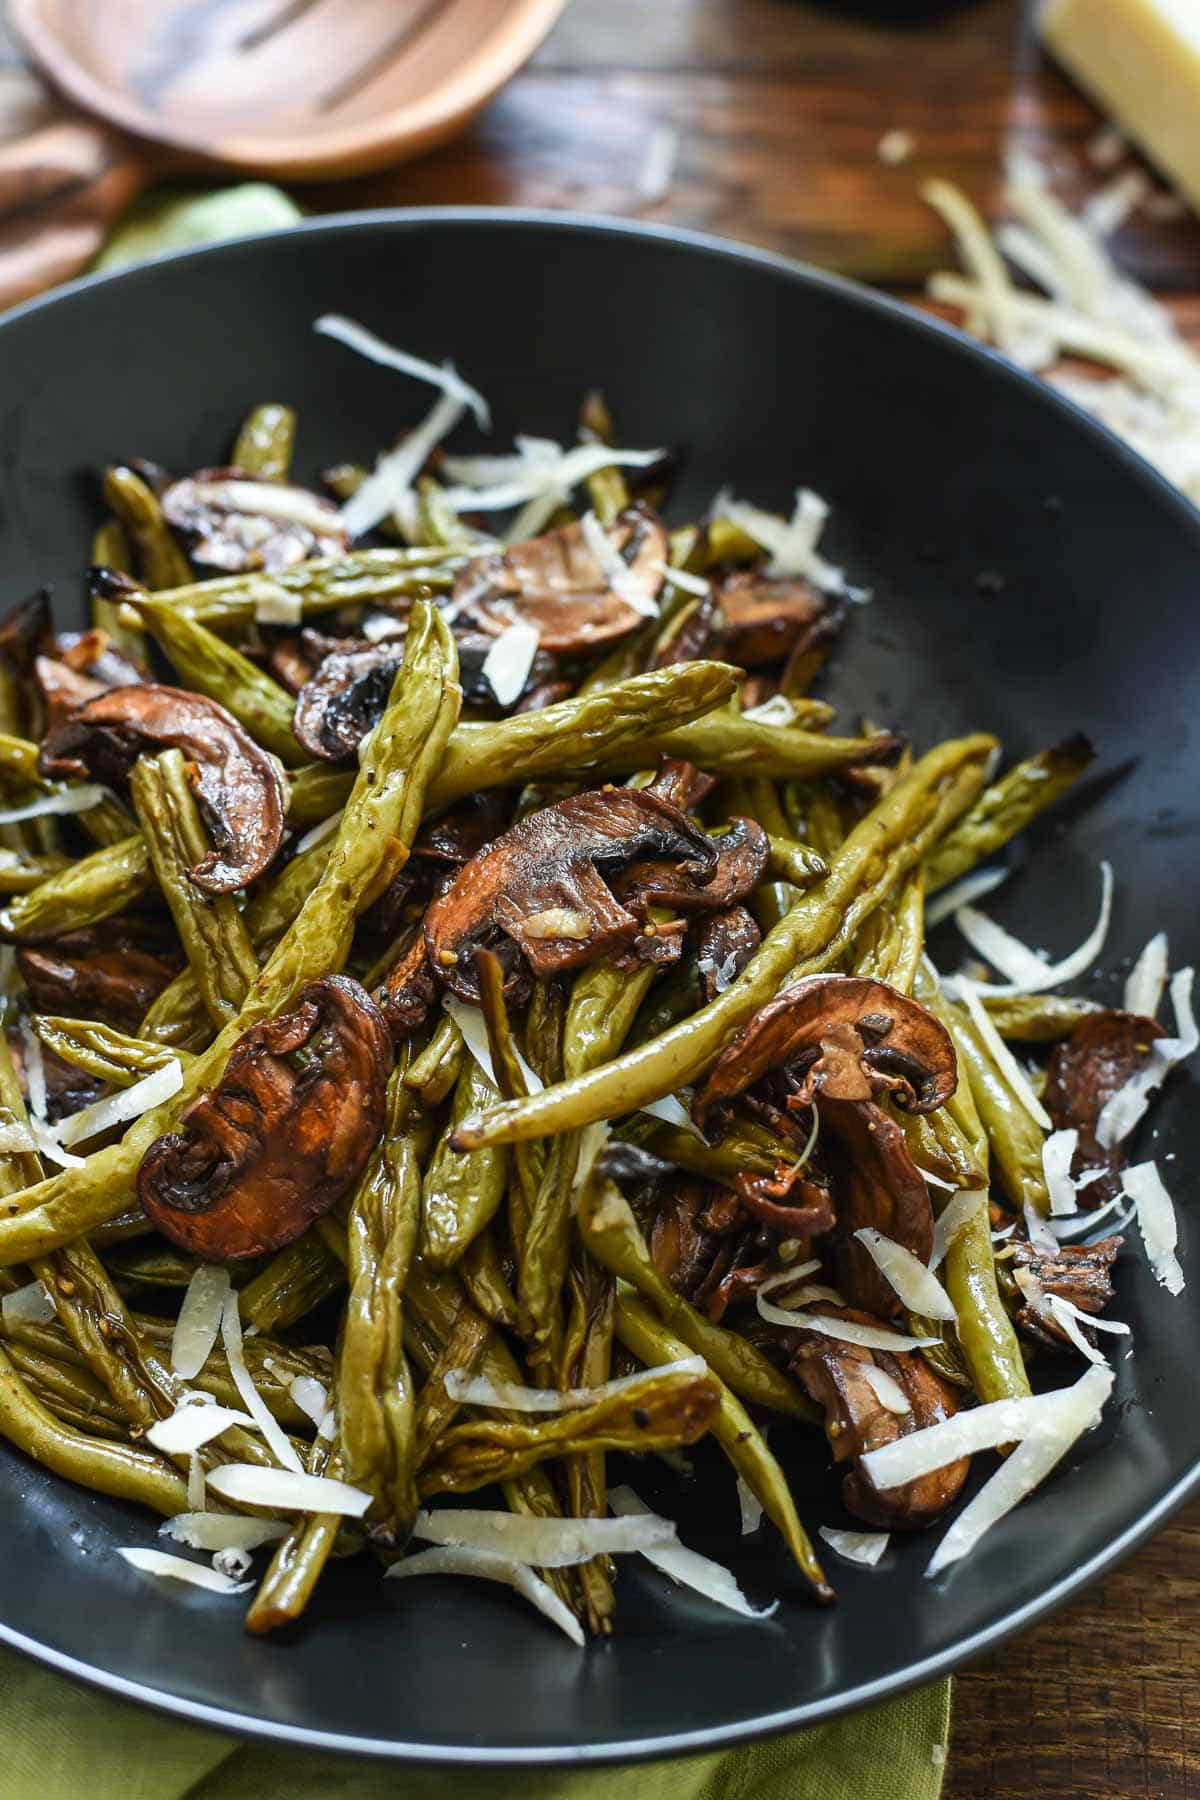 Balsamic Roasted Green Beans and Mushrooms are loaded with flavor and great for a quick weeknight side dish or your Thanksgiving table!